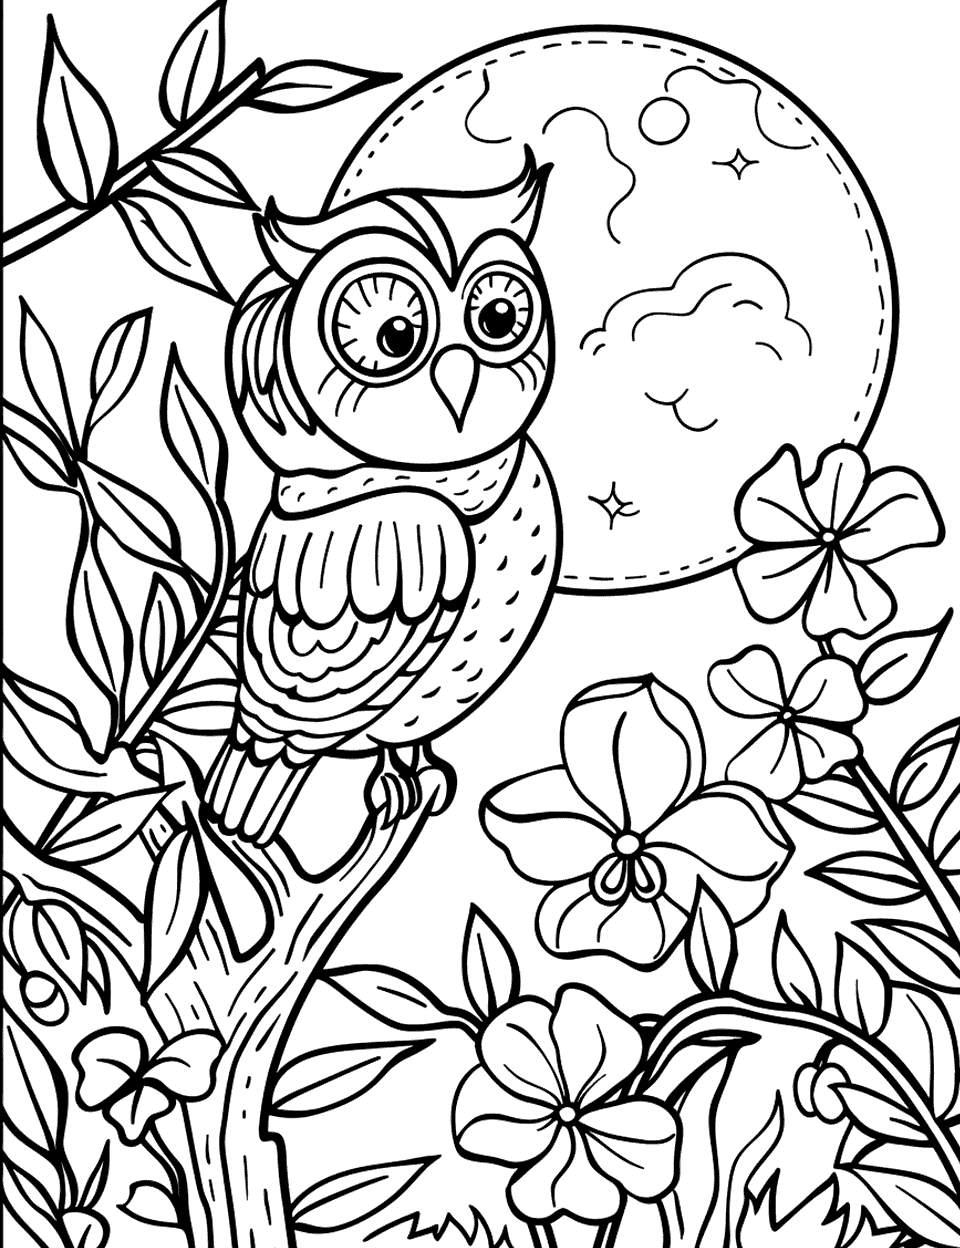 Owl in a Nighttime Garden Coloring Page - An owl perched on a tree branch in a moonlit garden.